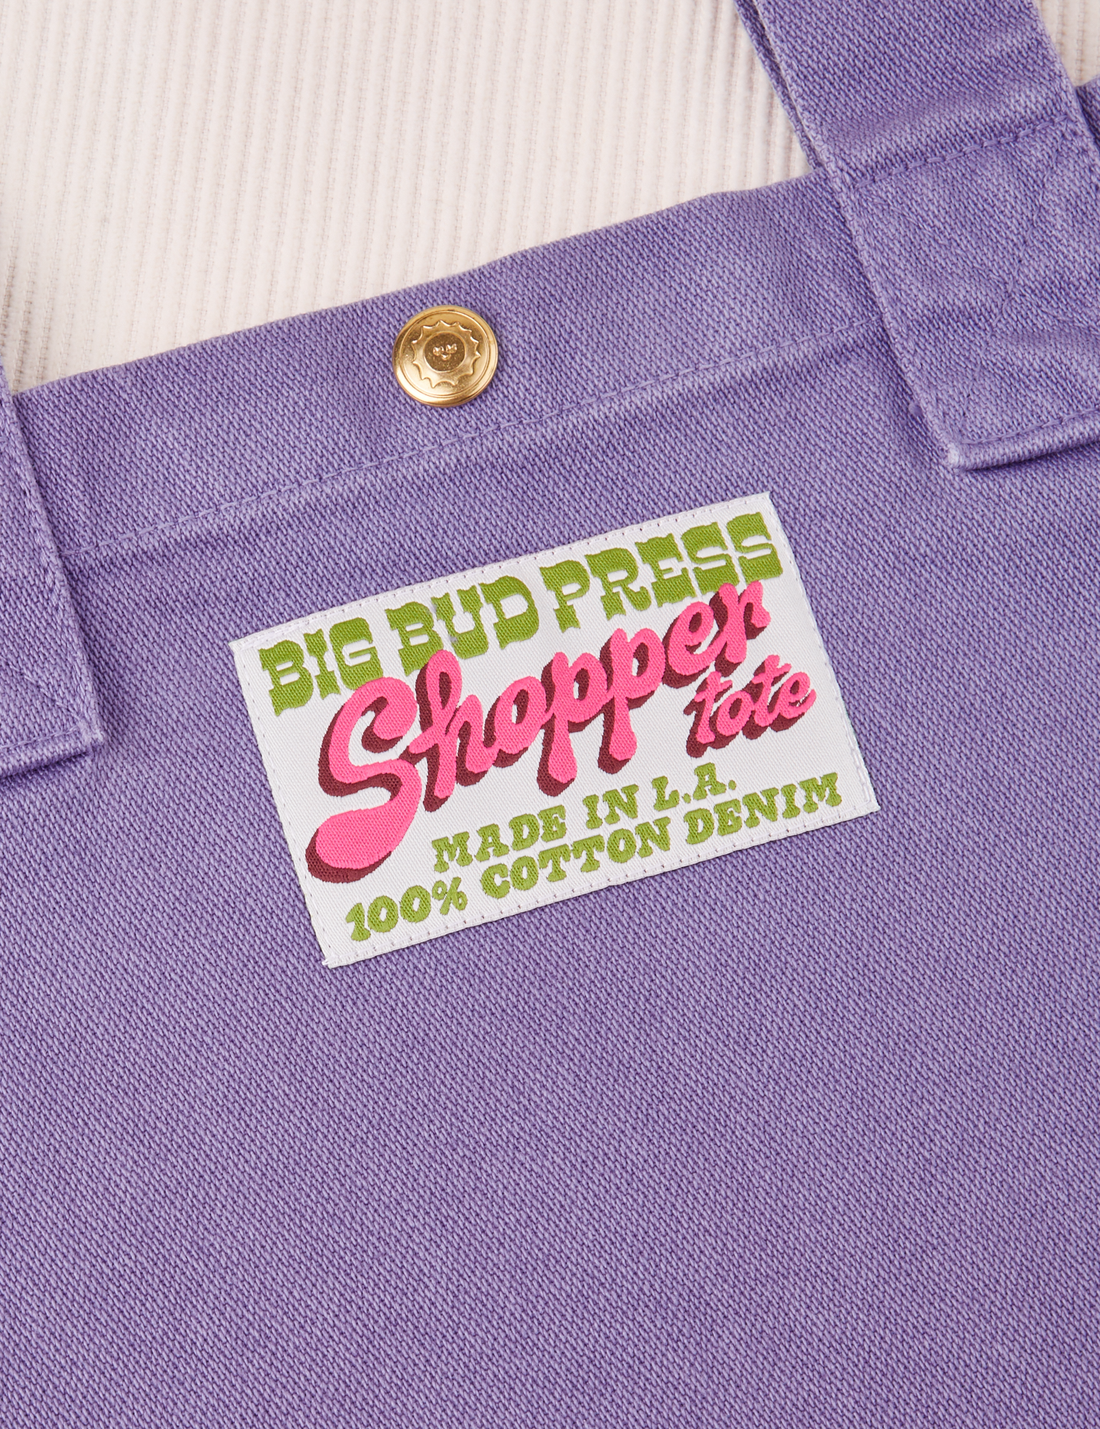 Sun Baby brass snap on Shopper Tote Bag in Faded Grape. Bag label in green and pink text that reads "Big Bud Press Shopper Tote, Made in L.A., 100% Cotton Denim" on a white background